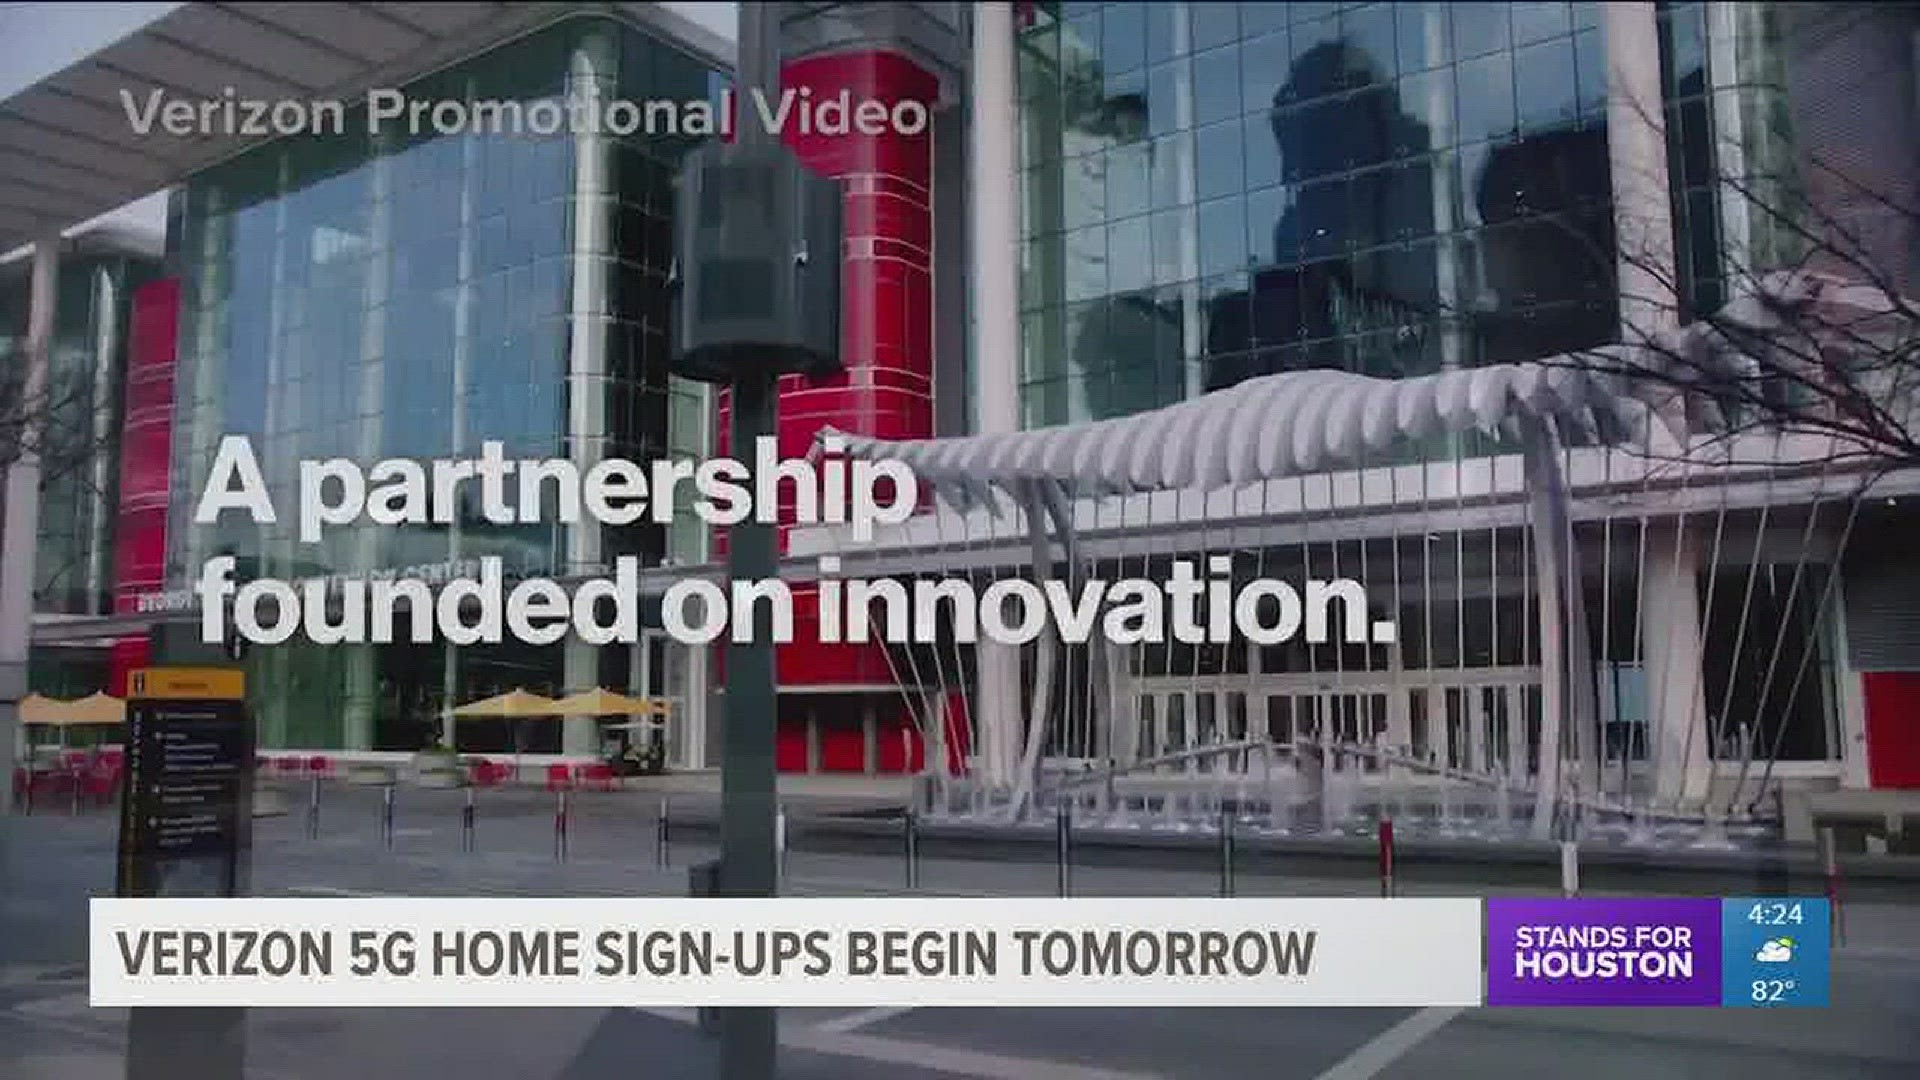 Starting Thursday, Houstonians can sign up for Verizon's new 5G home broadband internet service.